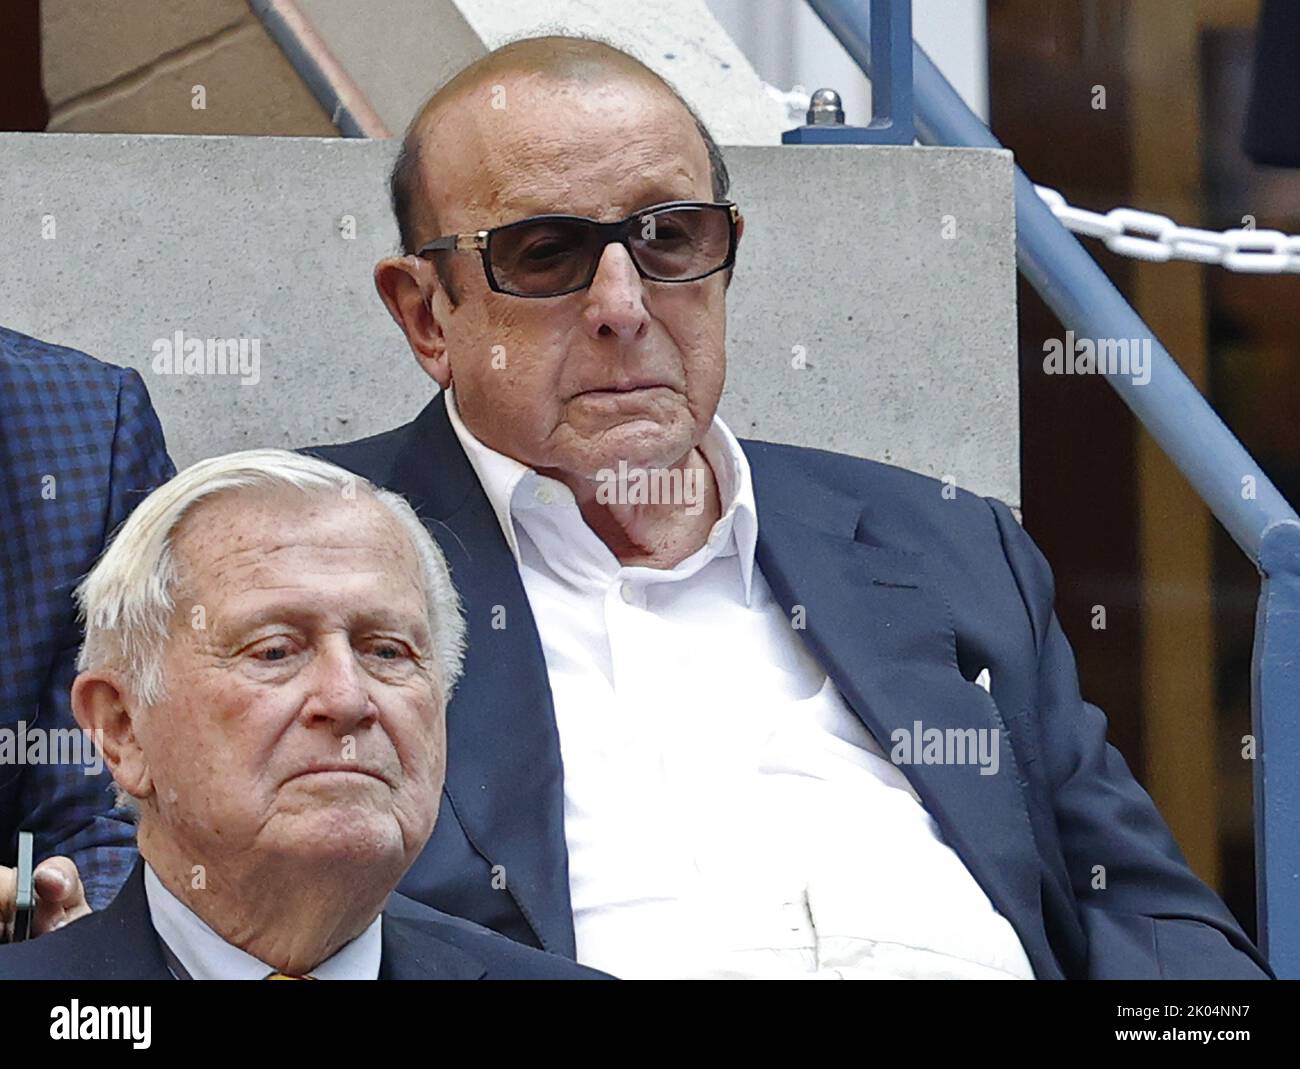 Flushing Meadow, United States. 09th Sep, 2022. Recording producer and executive Clive Davis watches the Men's semifinal match featuring Casper Ruud of Norway against Karen Khachanov of Russia at the 2022 US Open Tennis Championships at Arthur Ashe Stadium at the USTA Billy Jean King National Tennis Center in New York City on Friday, September 9, 2022. Photo by John Angelillo/UPI. Credit: UPI/Alamy Live News Stock Photo